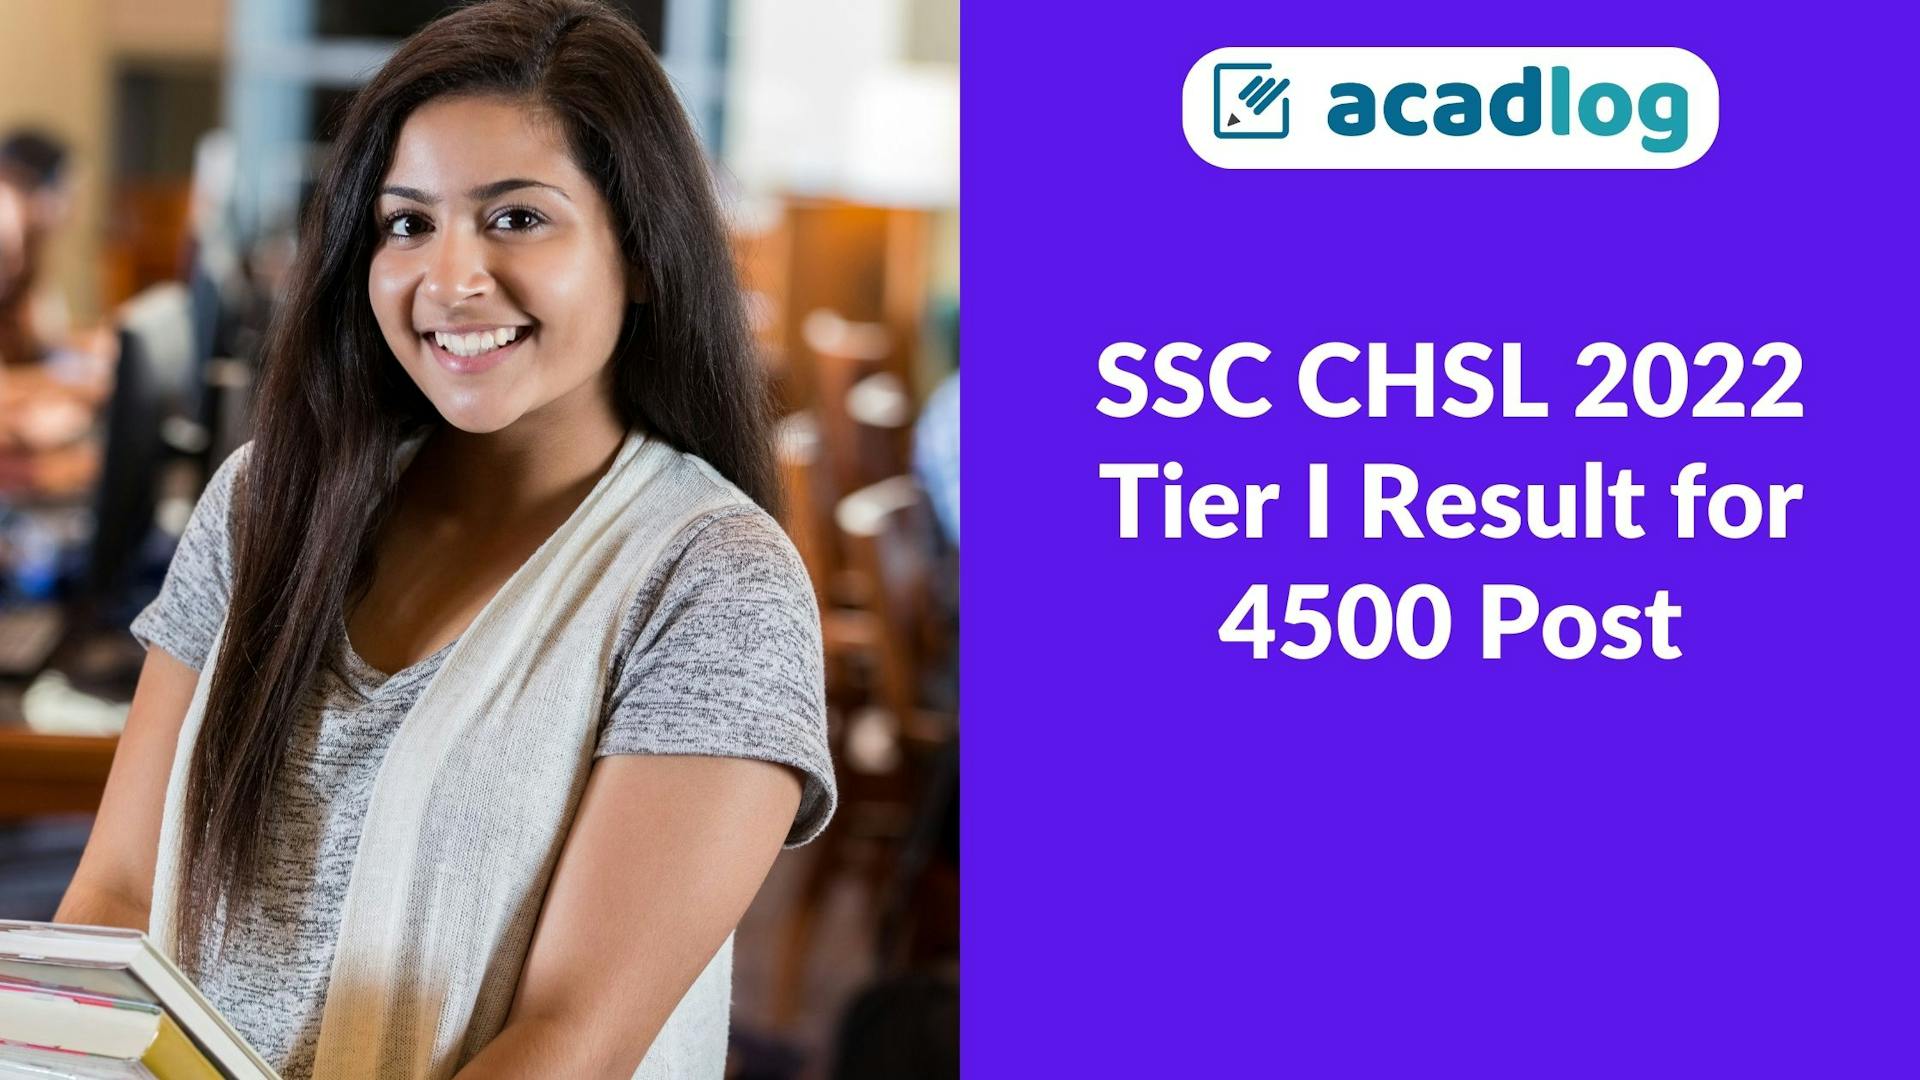 Latest and New Govt Jobs SSC 10+2 CHSL Recruitment 2022 Tier I Answer Key, Tier II Result for 4500 Post